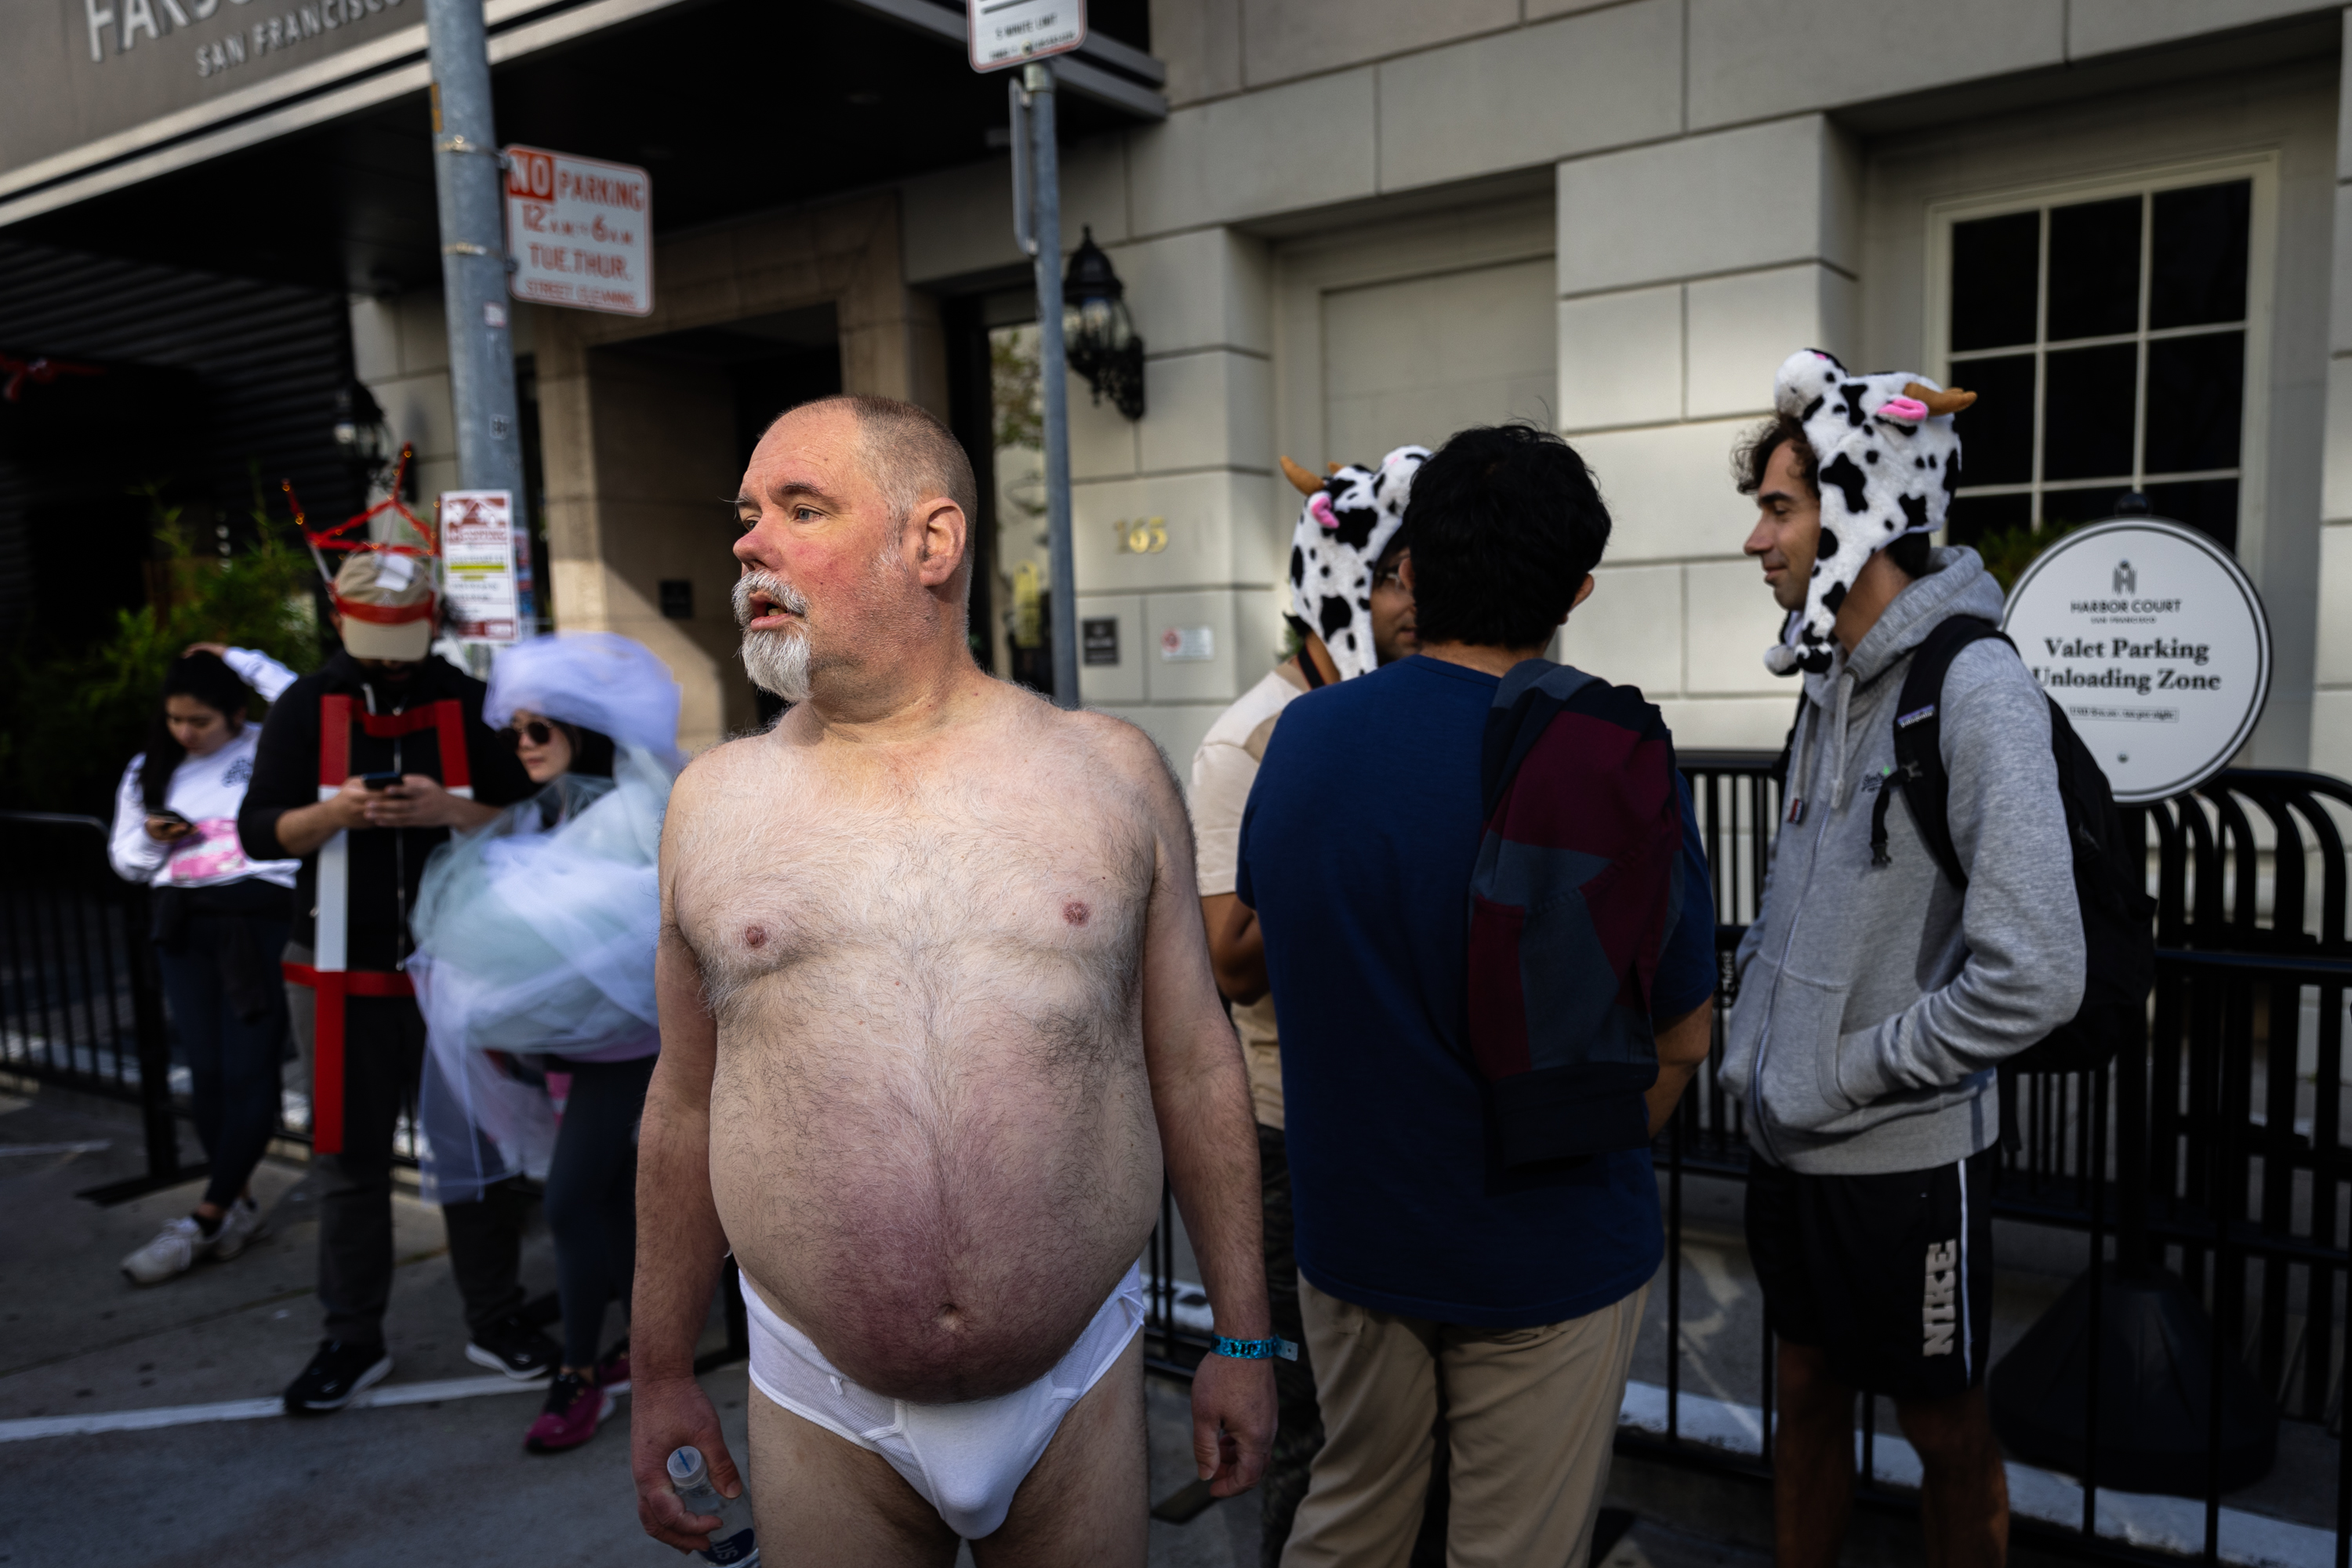 A man without a shirt, wearing only a white brief, stands in a city street crowded with festively dressed people.